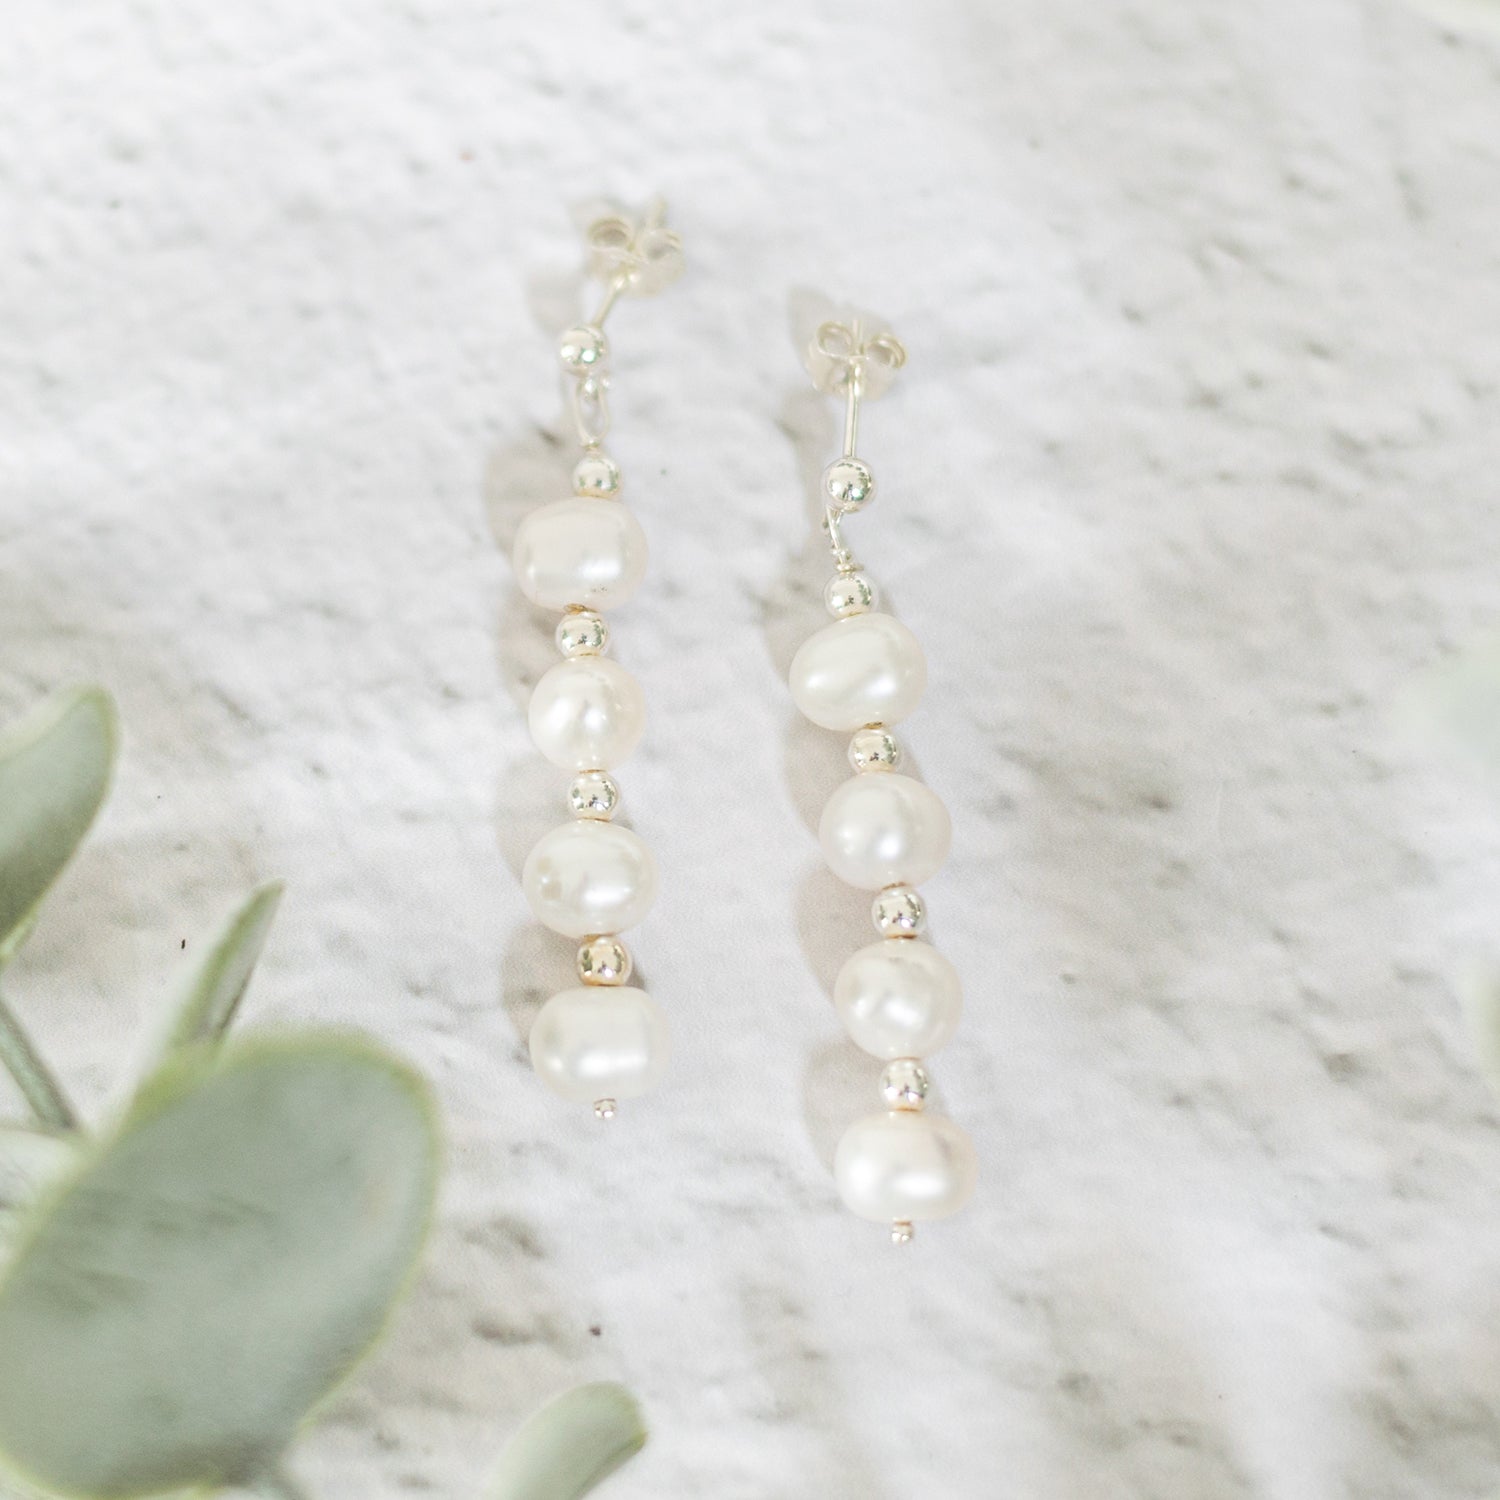  A pair of silver pearl drop earrings featuring a vertical arrangement of small white pearls interspersed with silver bead accents. The earrings are laid on a light surface, accompanied by green leaves on the left corner, creating a delicate aesthetic